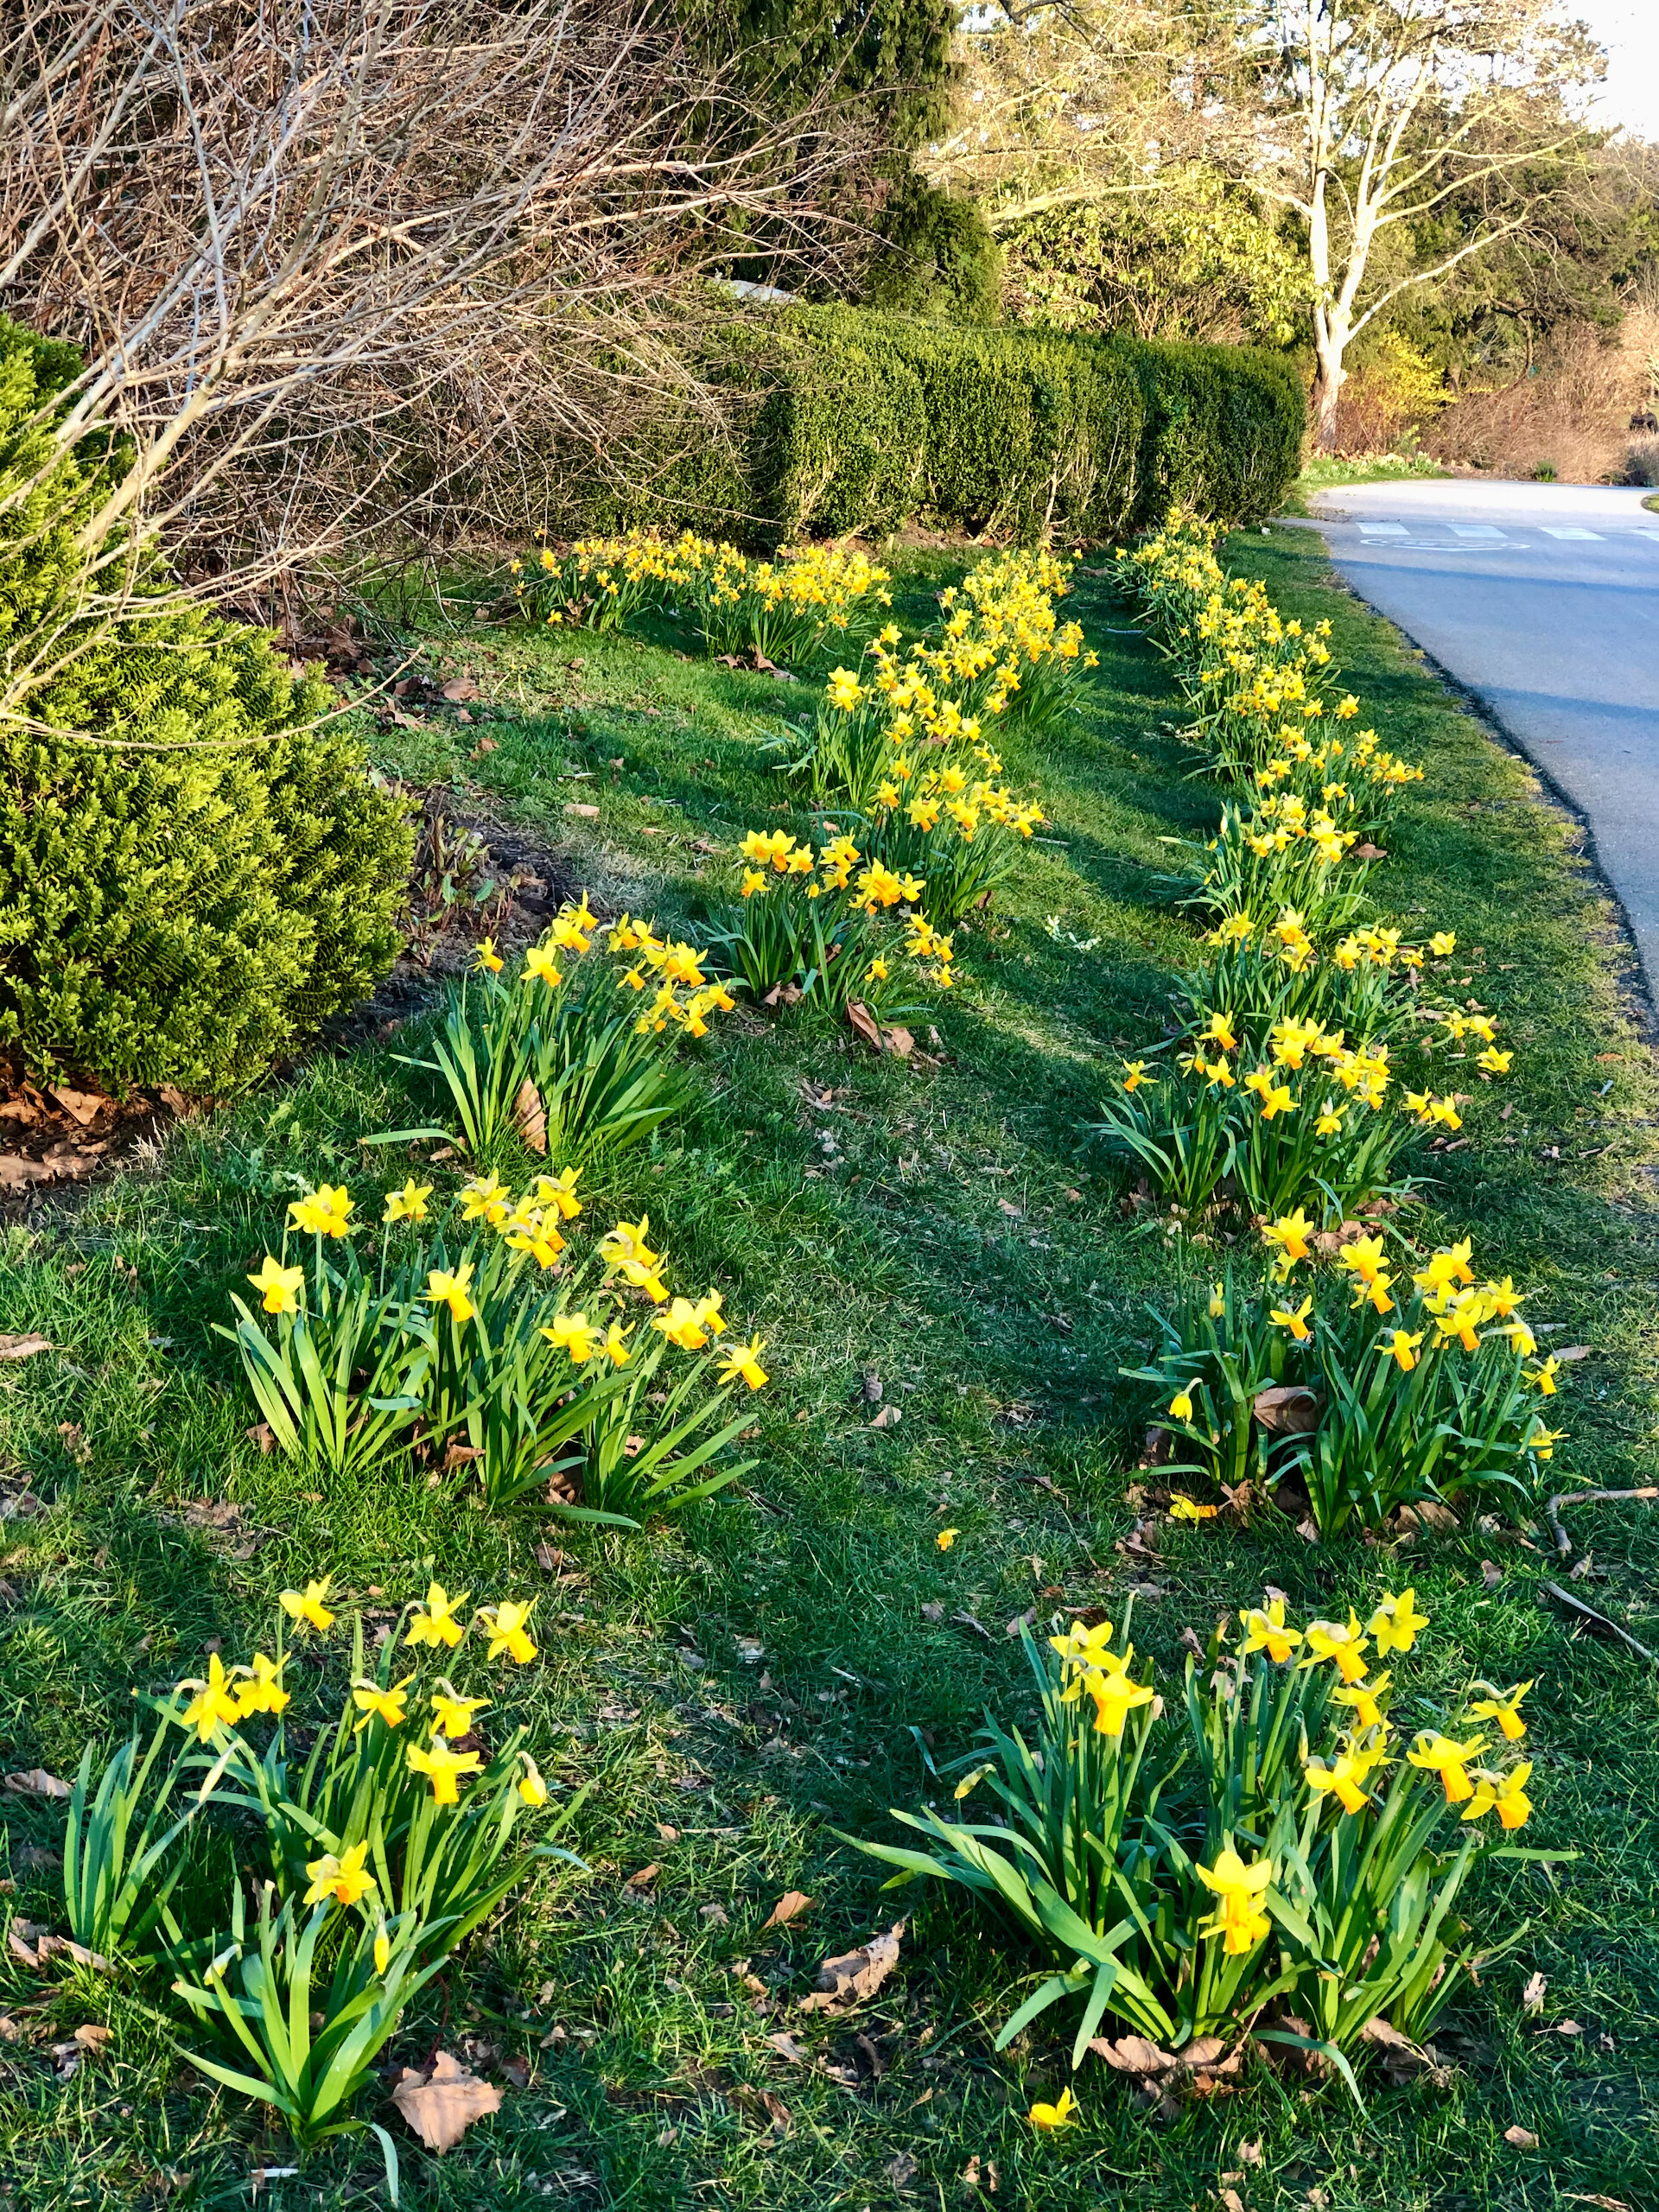  Even the daffodils were in full bloom along the seawall.  